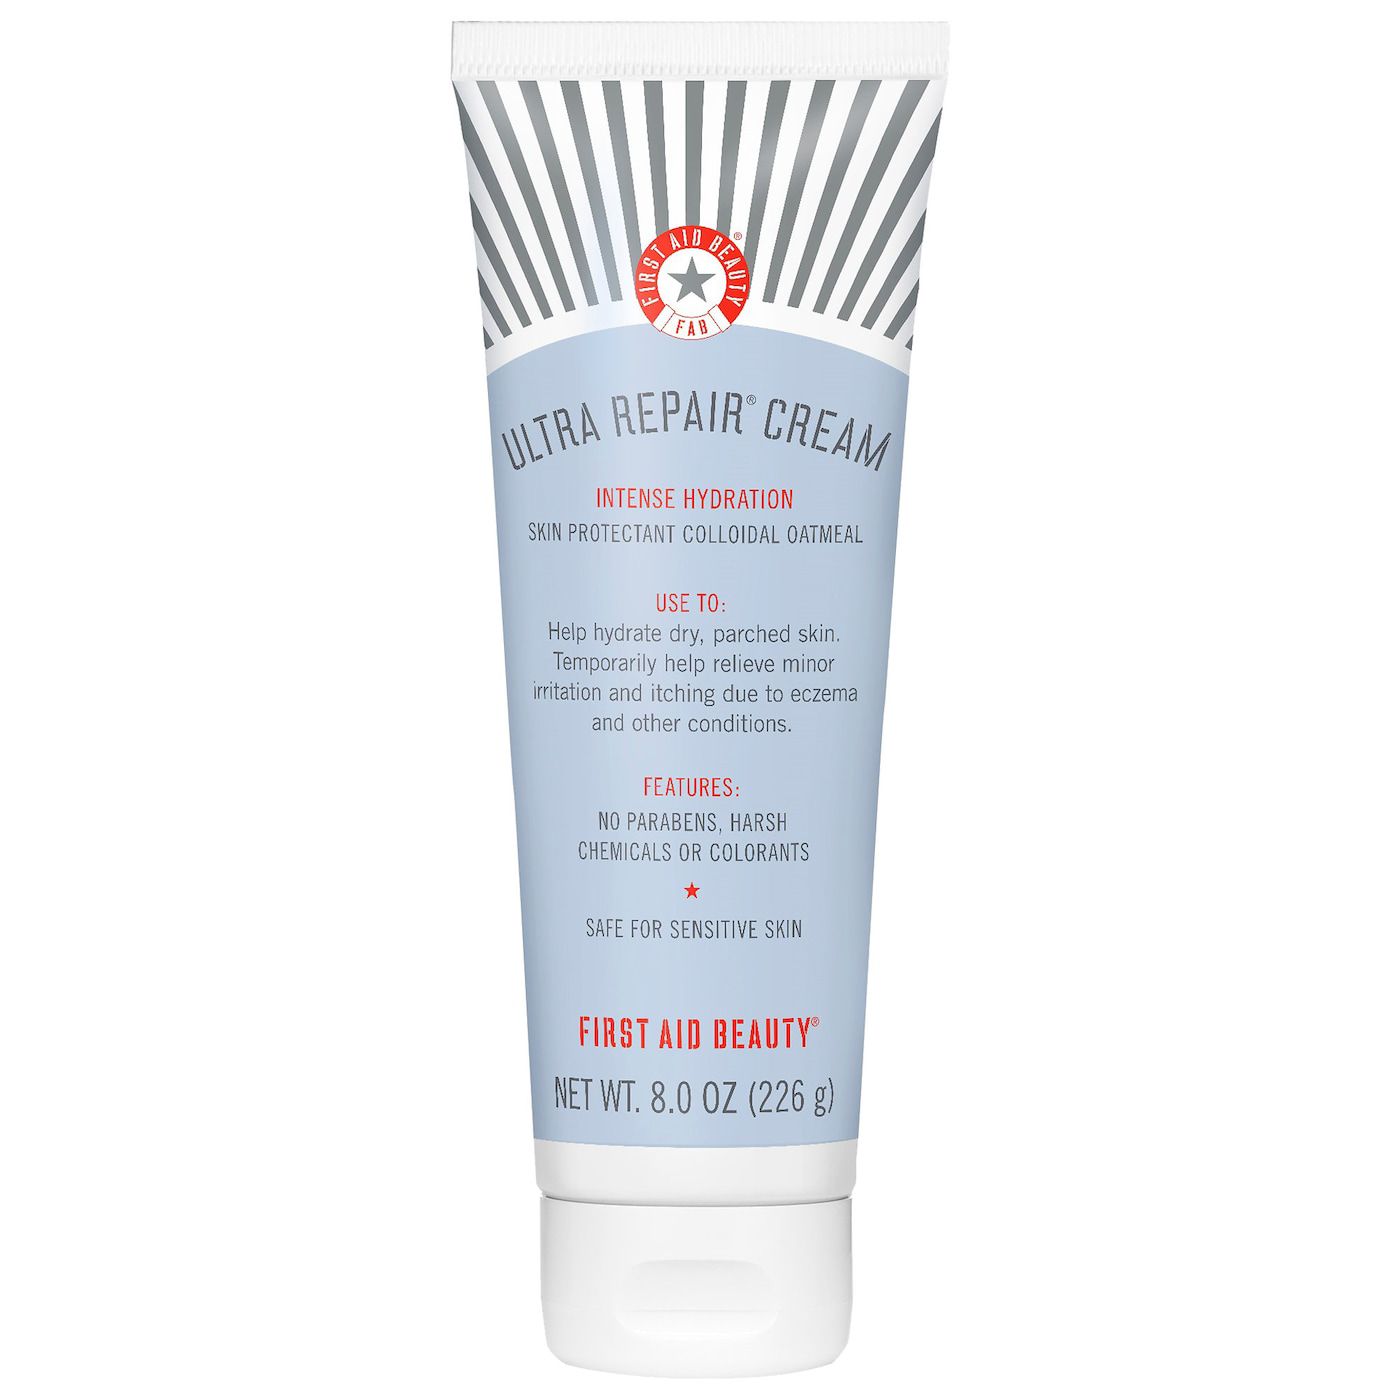 8-Oz First Aid Beauty Ultra Repair Cream Intense Hydration $15 + Free Shipping